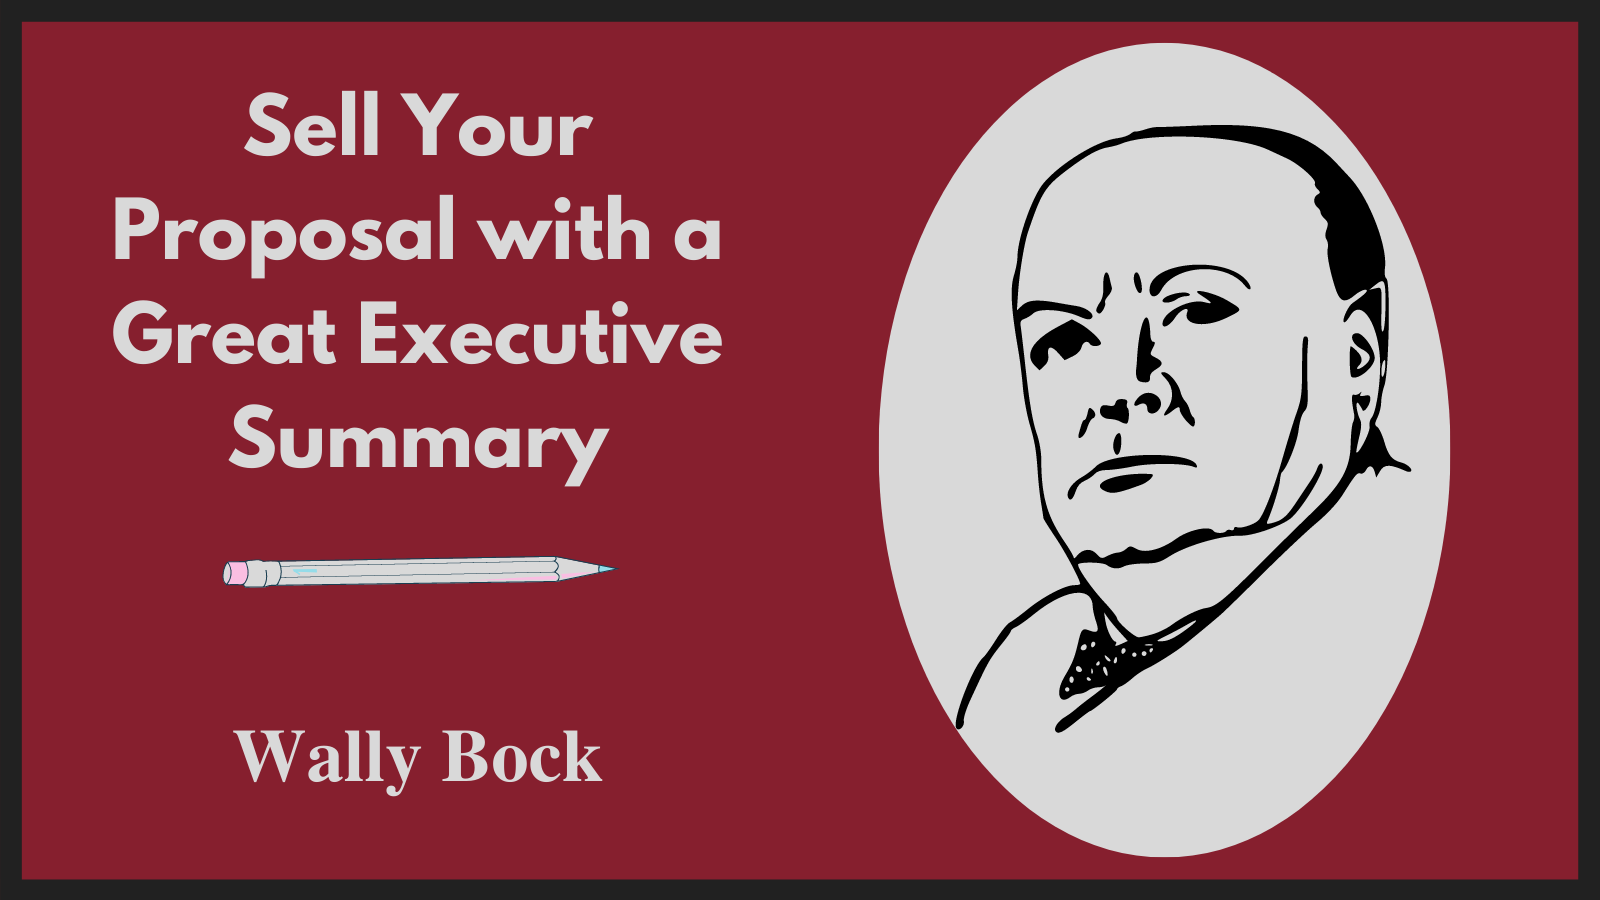 Sell Your Proposal with a Great Executive Summary